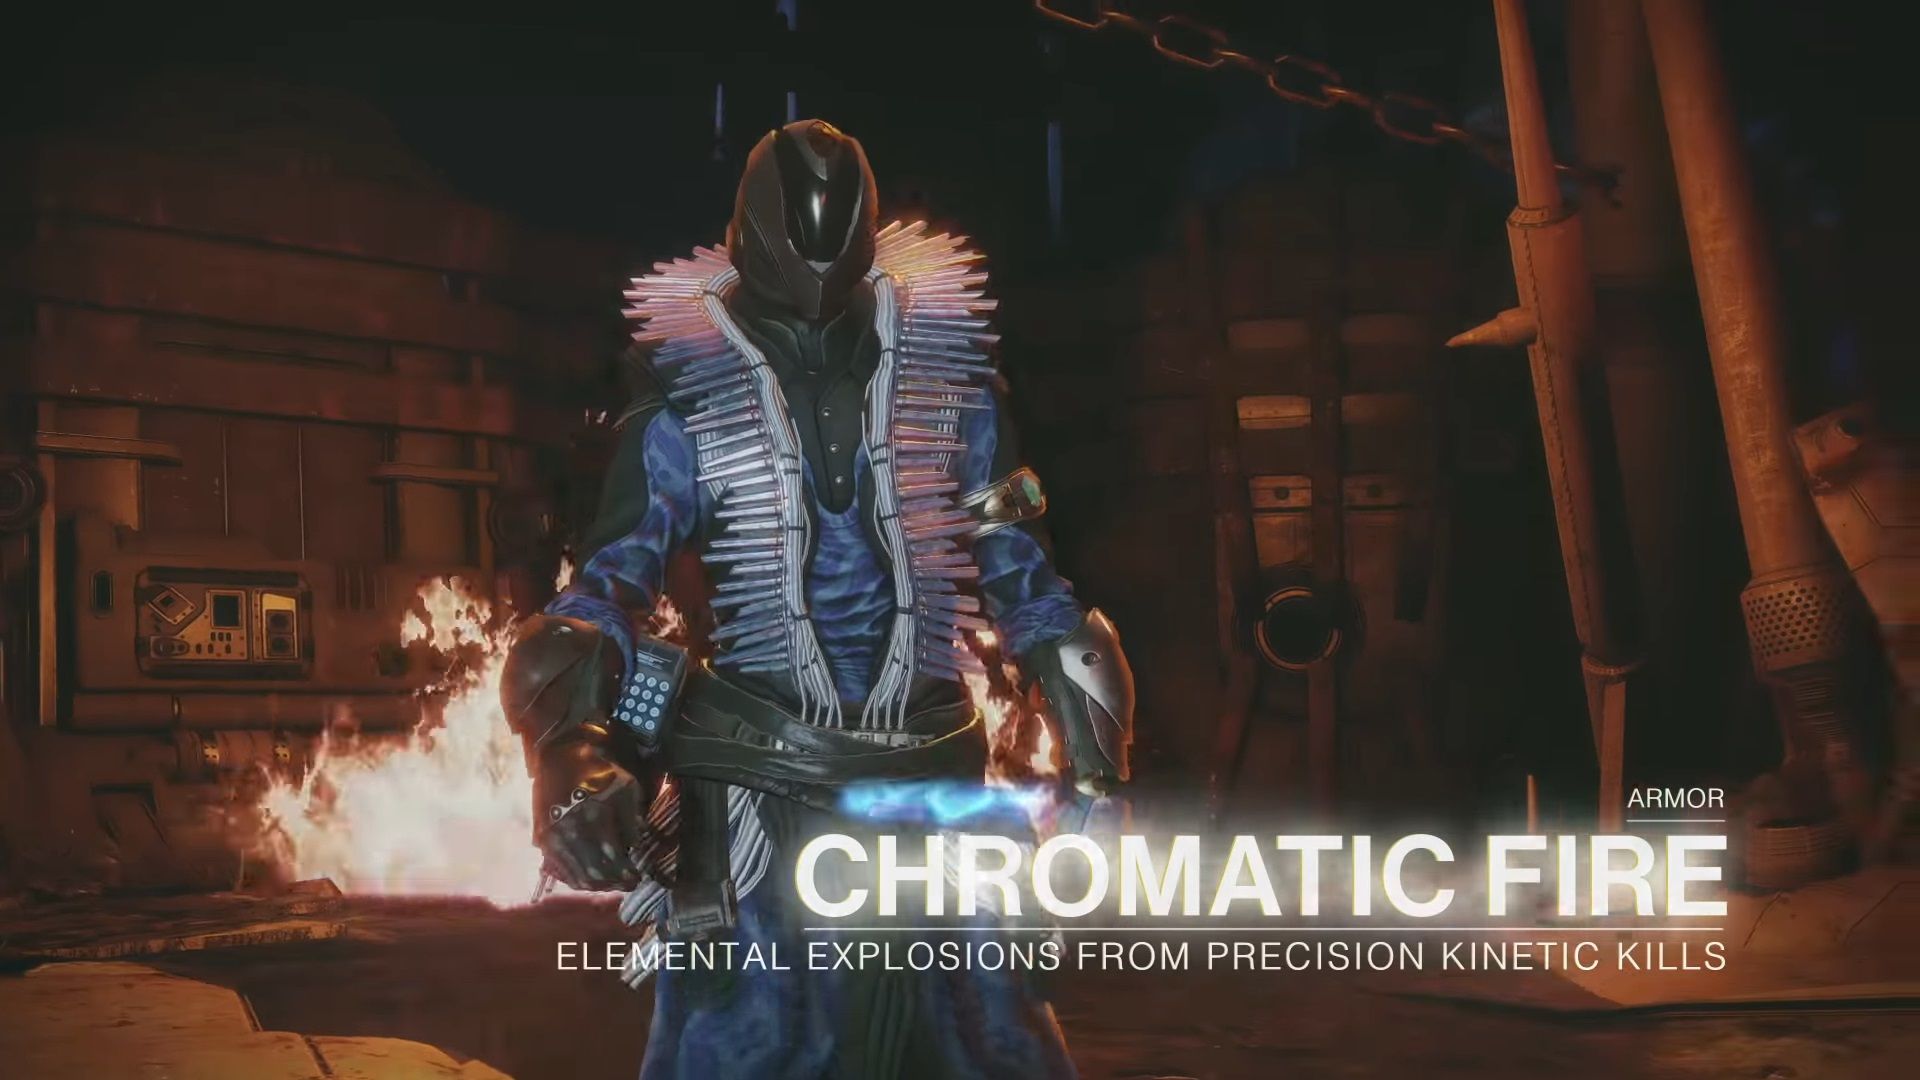 Destiny 2 Xur Exotic Armor Weapon and Location for Aug 30